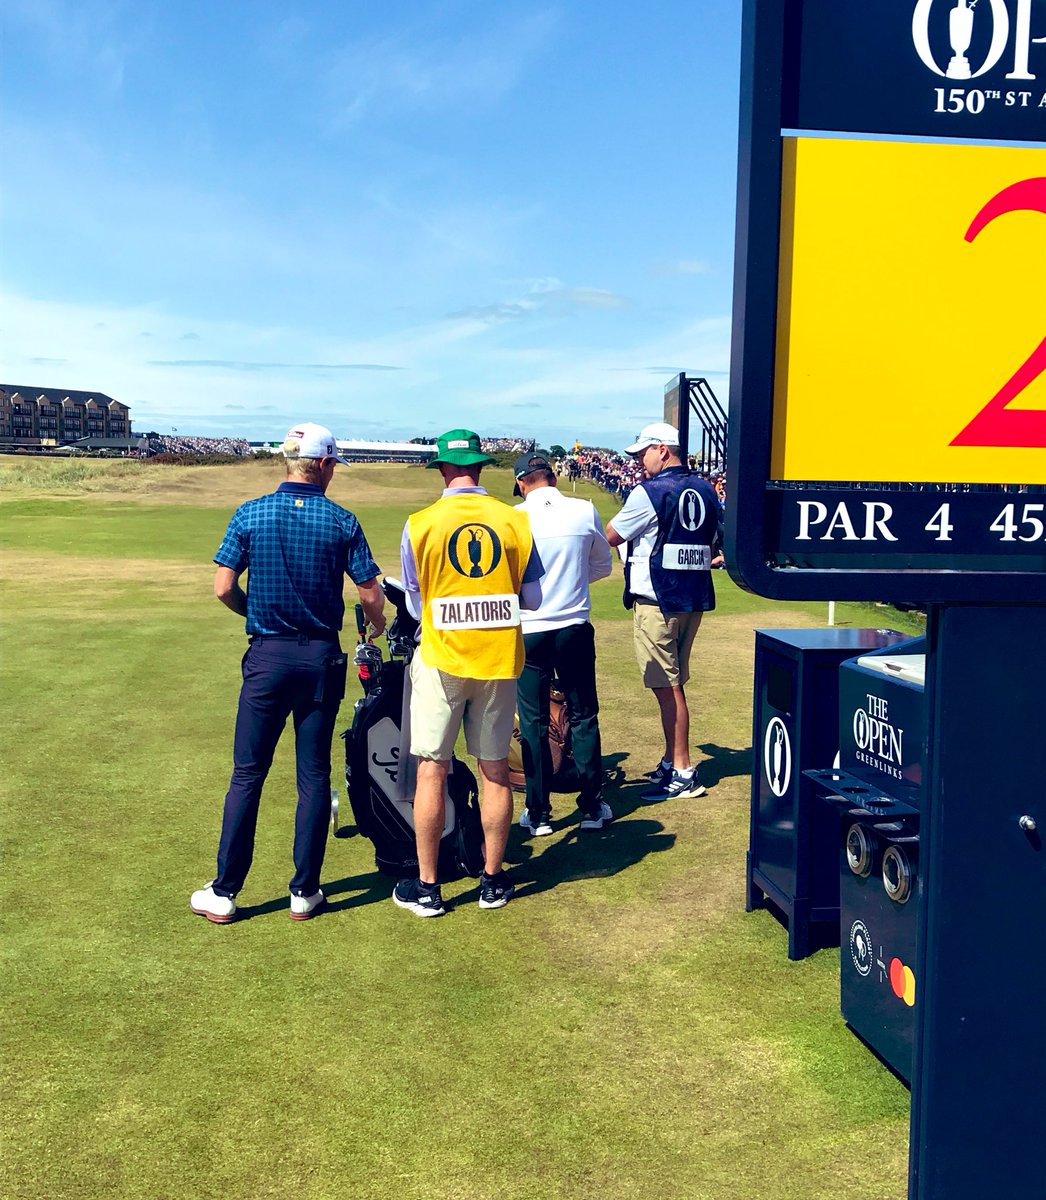 Out with Will Zalatoris and Sergio Garcia. Both had hot rounds yesterday and will fancy their chances of making a charge on Moving Day. WZ birdies the 1st to get to -5 #The150thOpen https://t.co/zp5KmHEcNT